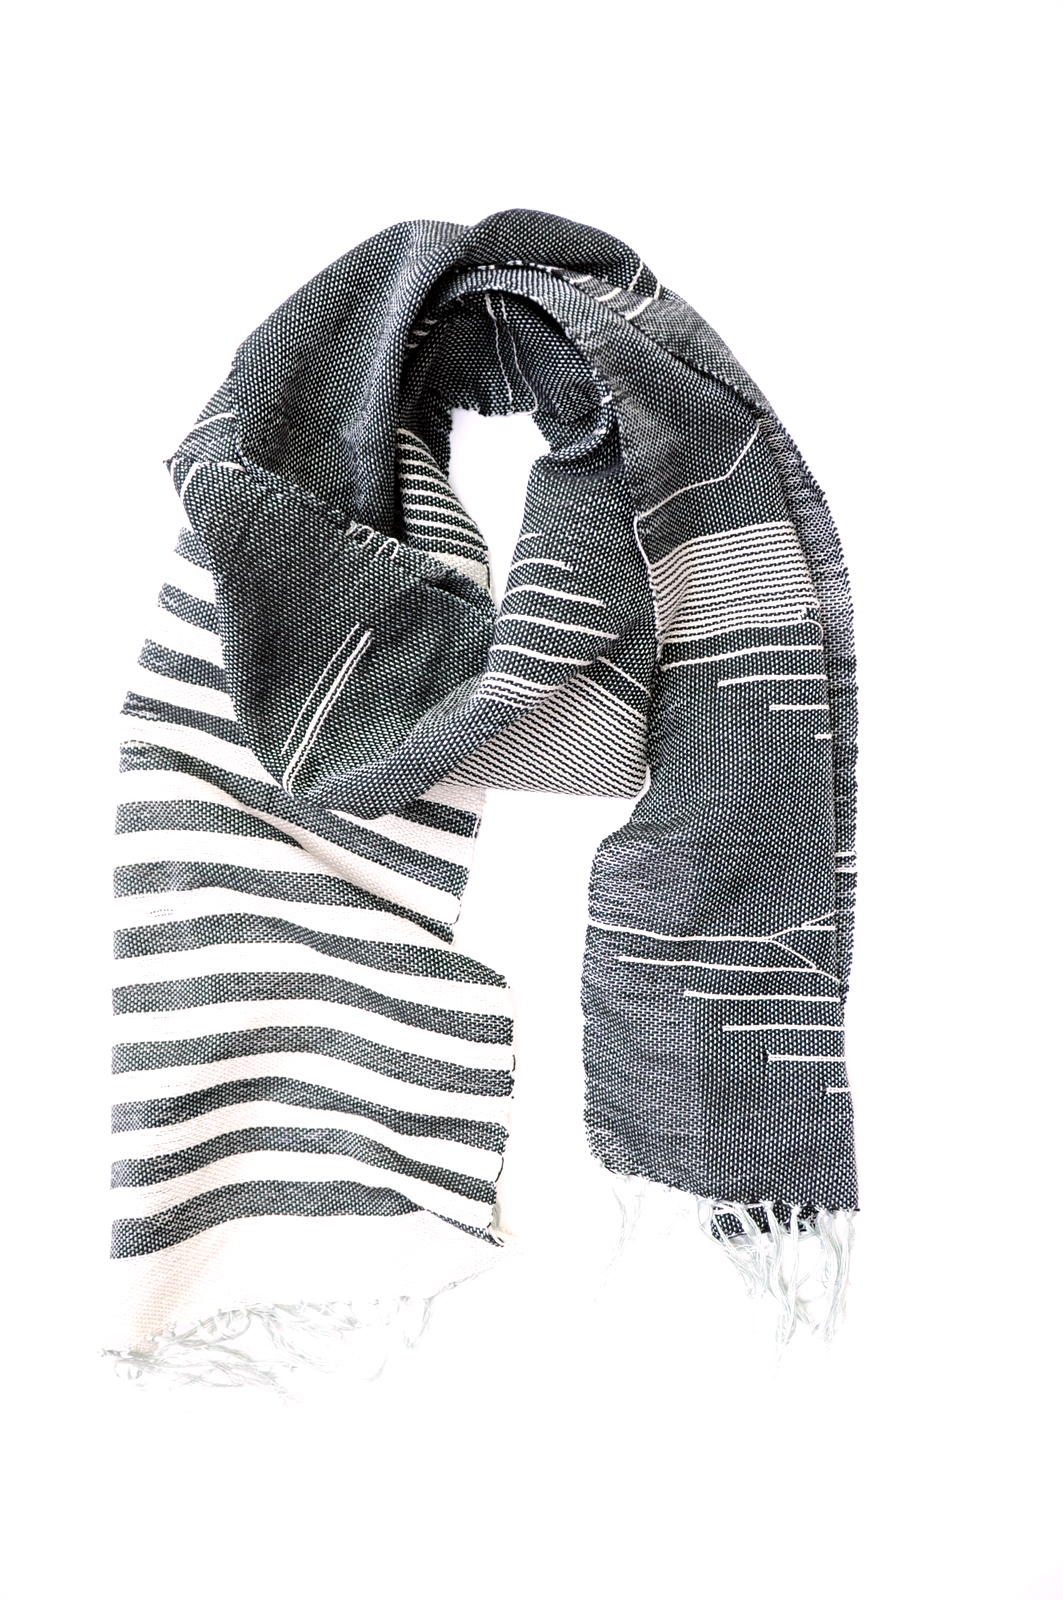 black and white woven scarf by amber kane